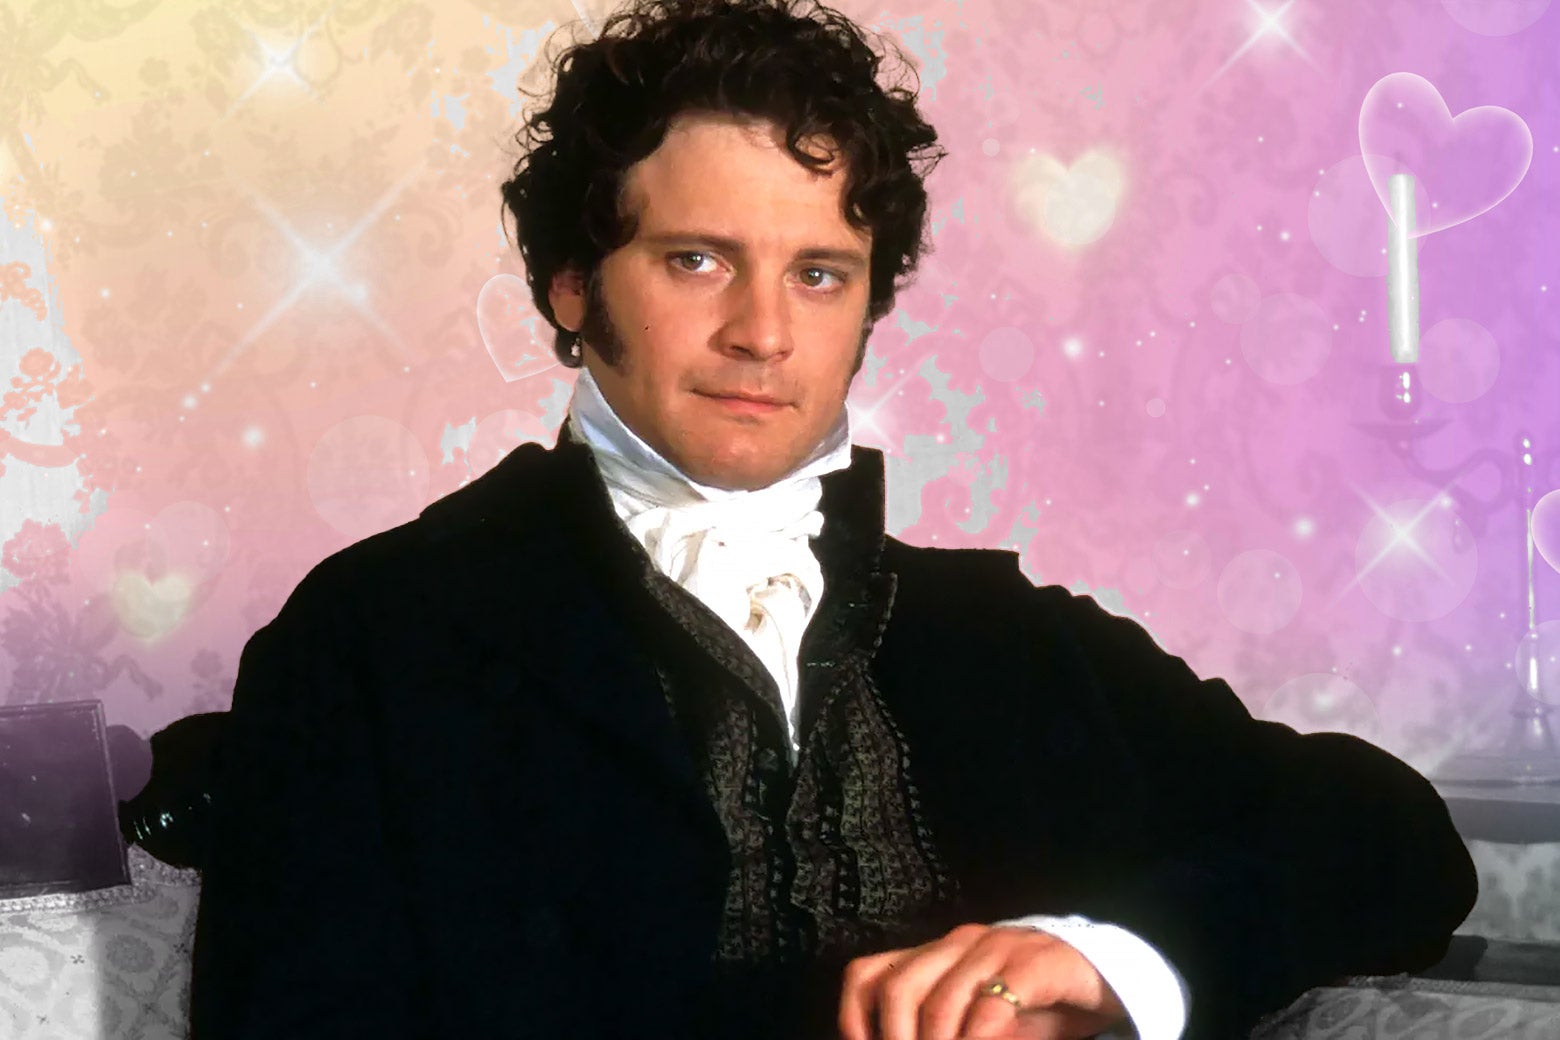 Colin Firth as Mr. Darcy: a Regency-era white man with dark curly hair smolders at the camera, in front of a purple-pink background of hearts and sparkles.